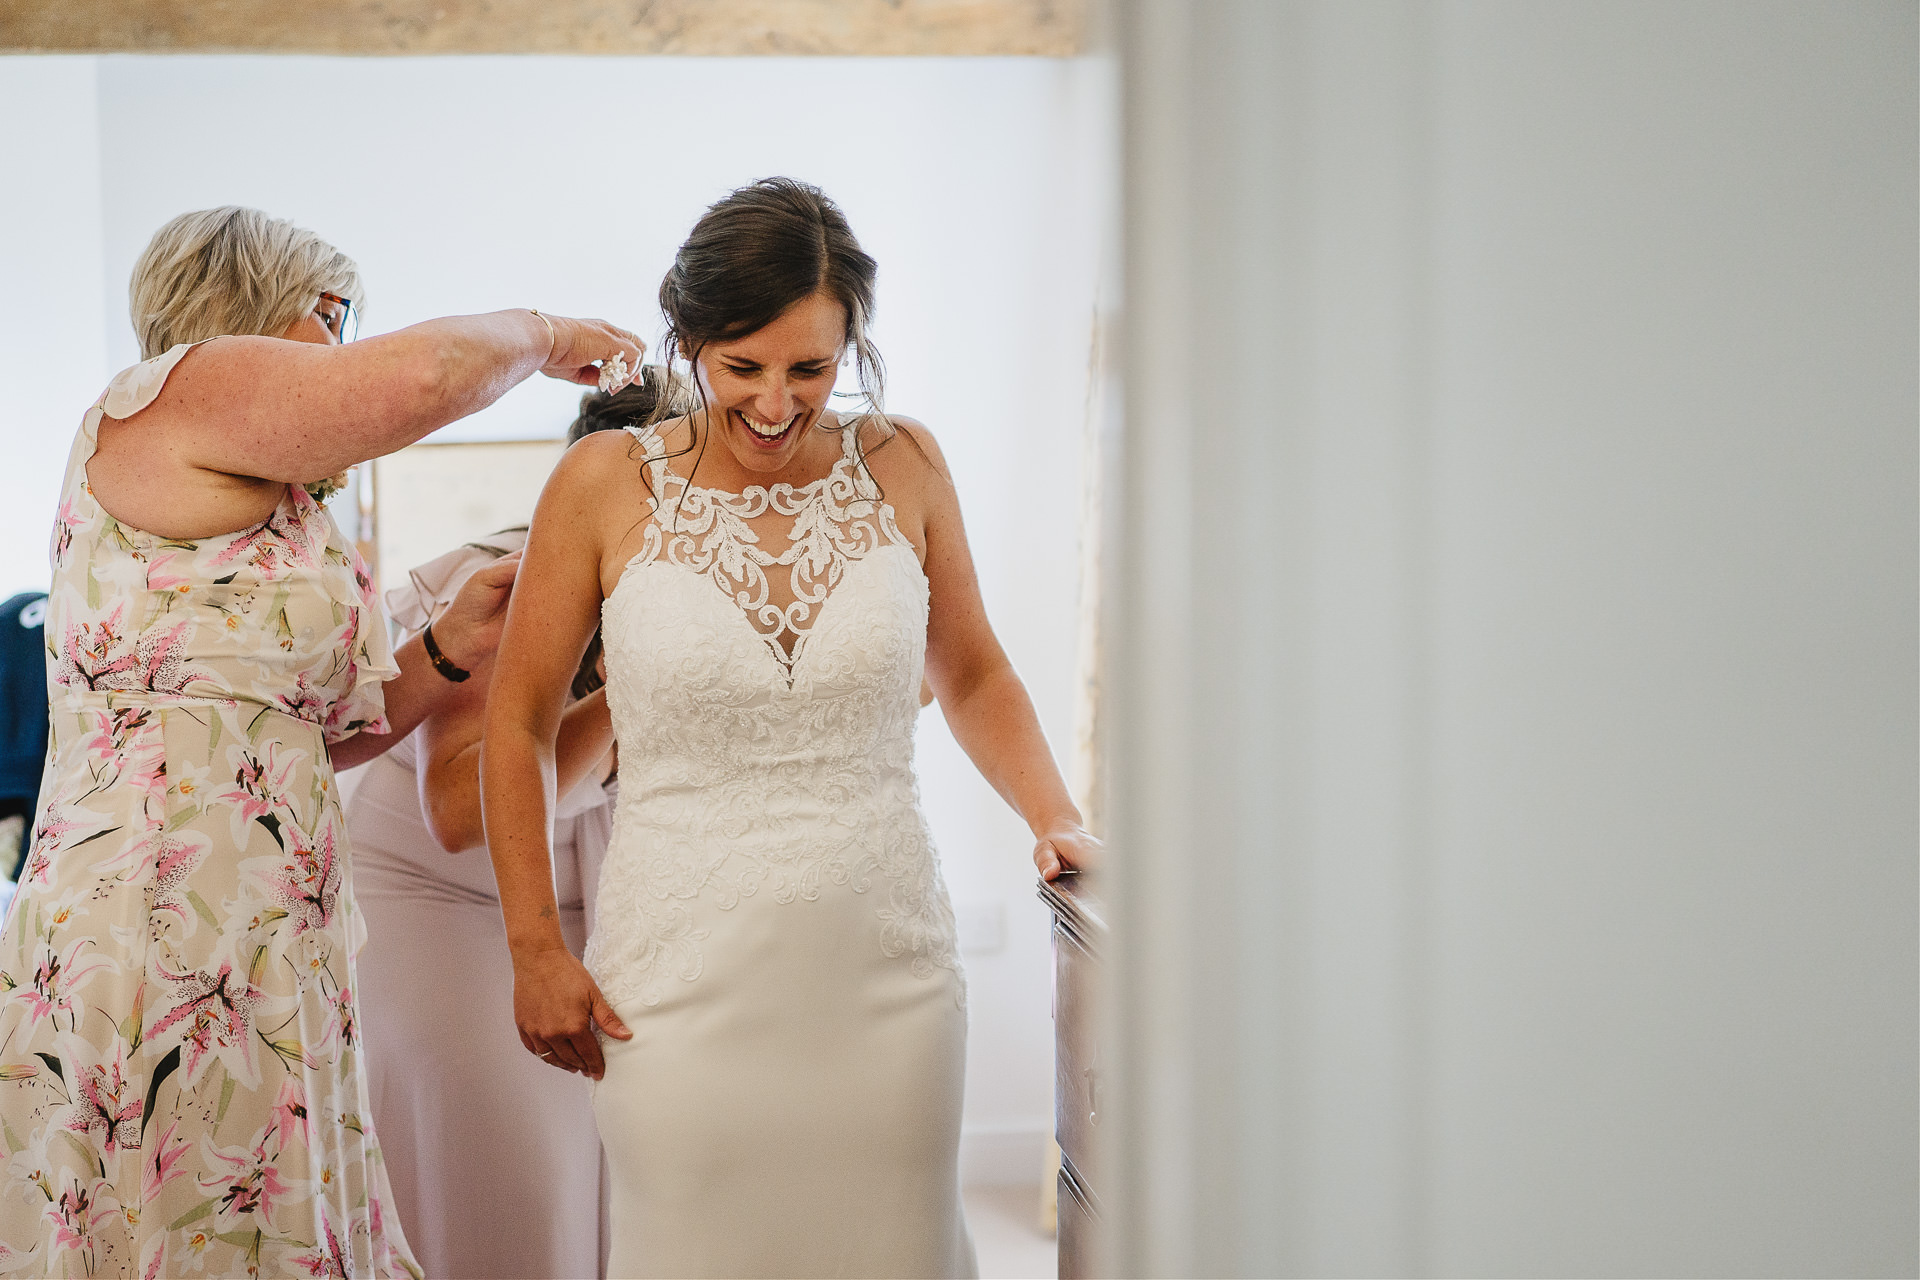 Bride to be putting on her wedding dress with family helping